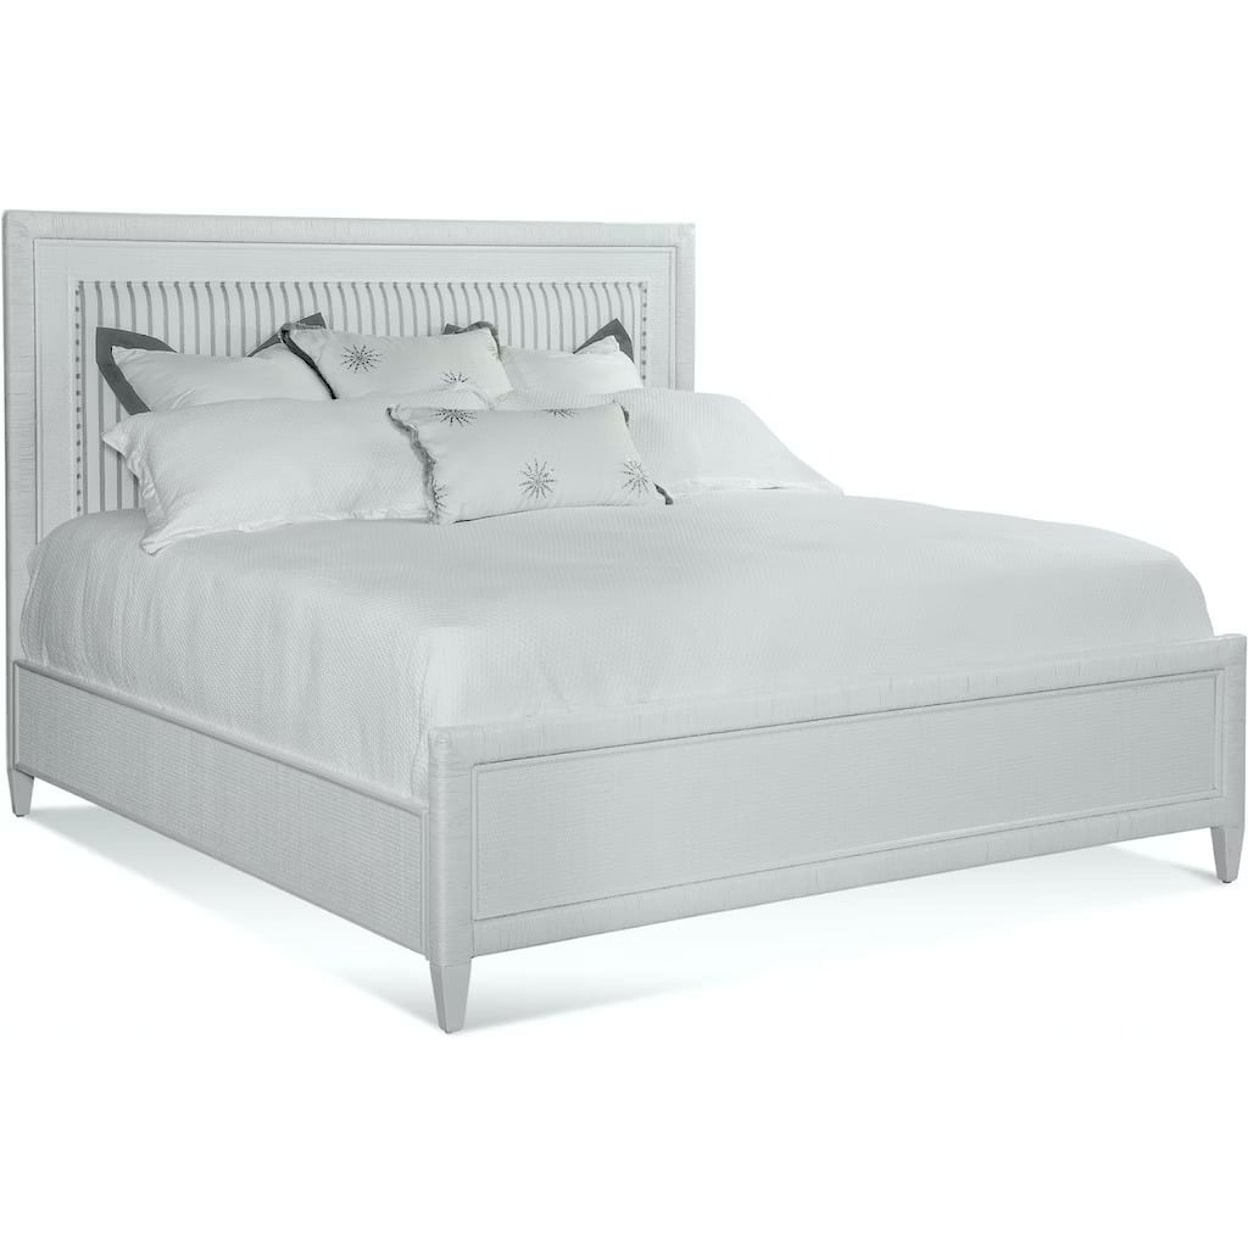 Braxton Culler Sabal Bay Queen Upholstered Panel Bed